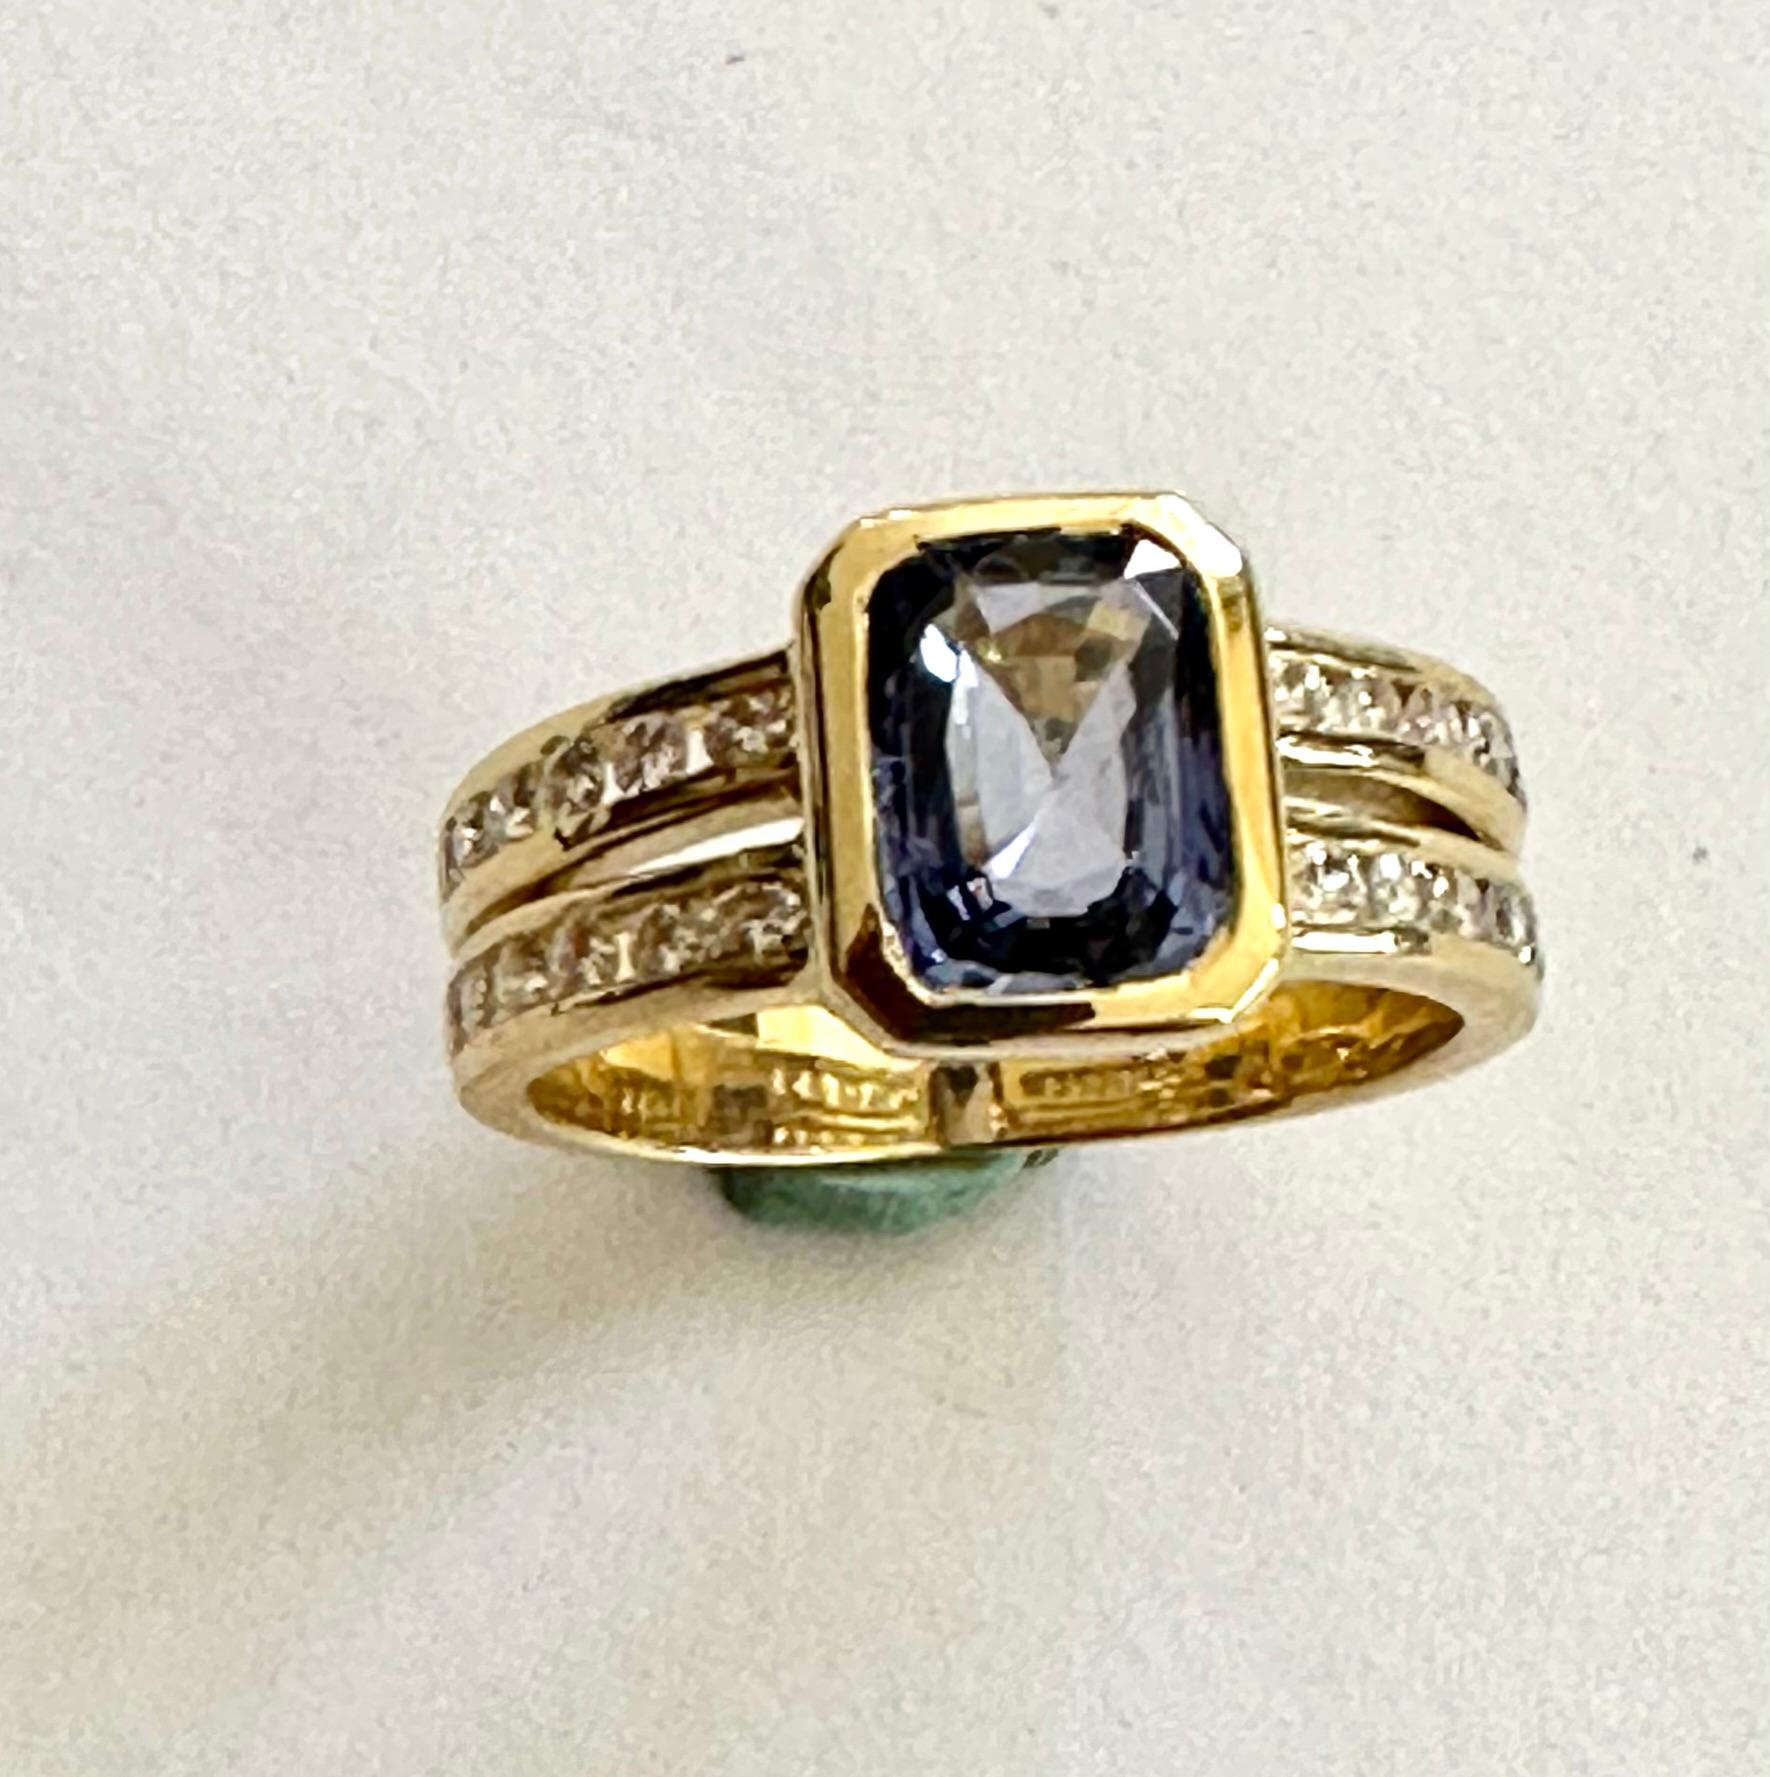 An 18K. yellow gold ring set with a sapphire and 24 brilliant cut diamonds.
Sapphire: 2.13 ct. Cuchion cut Color: Violet Blue. No indication of heating.
24 brilliant cut diamonds total weight: 0.50ct VSI-G.
Ring was made in the Netherlands around